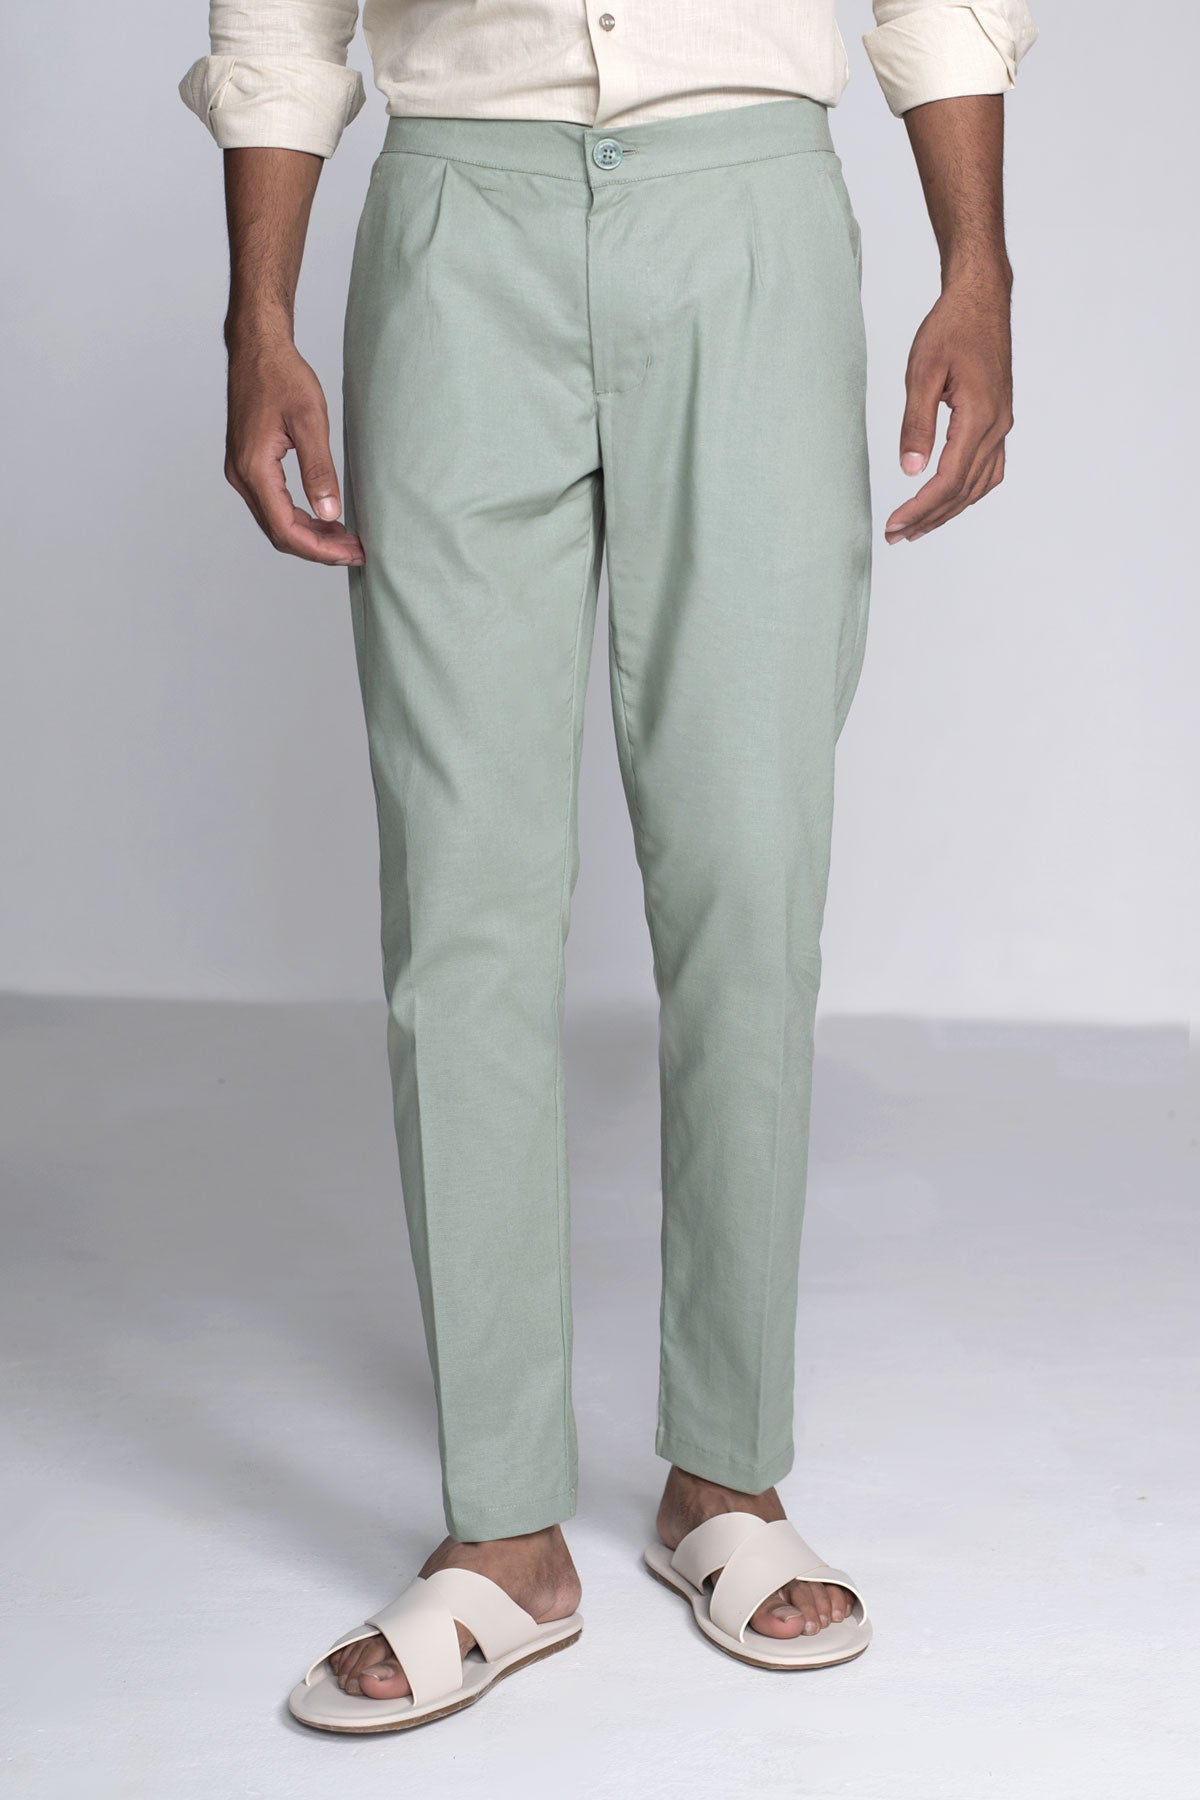 An Everyday Classic Green Stretch Men Chinos – Mark Morphy